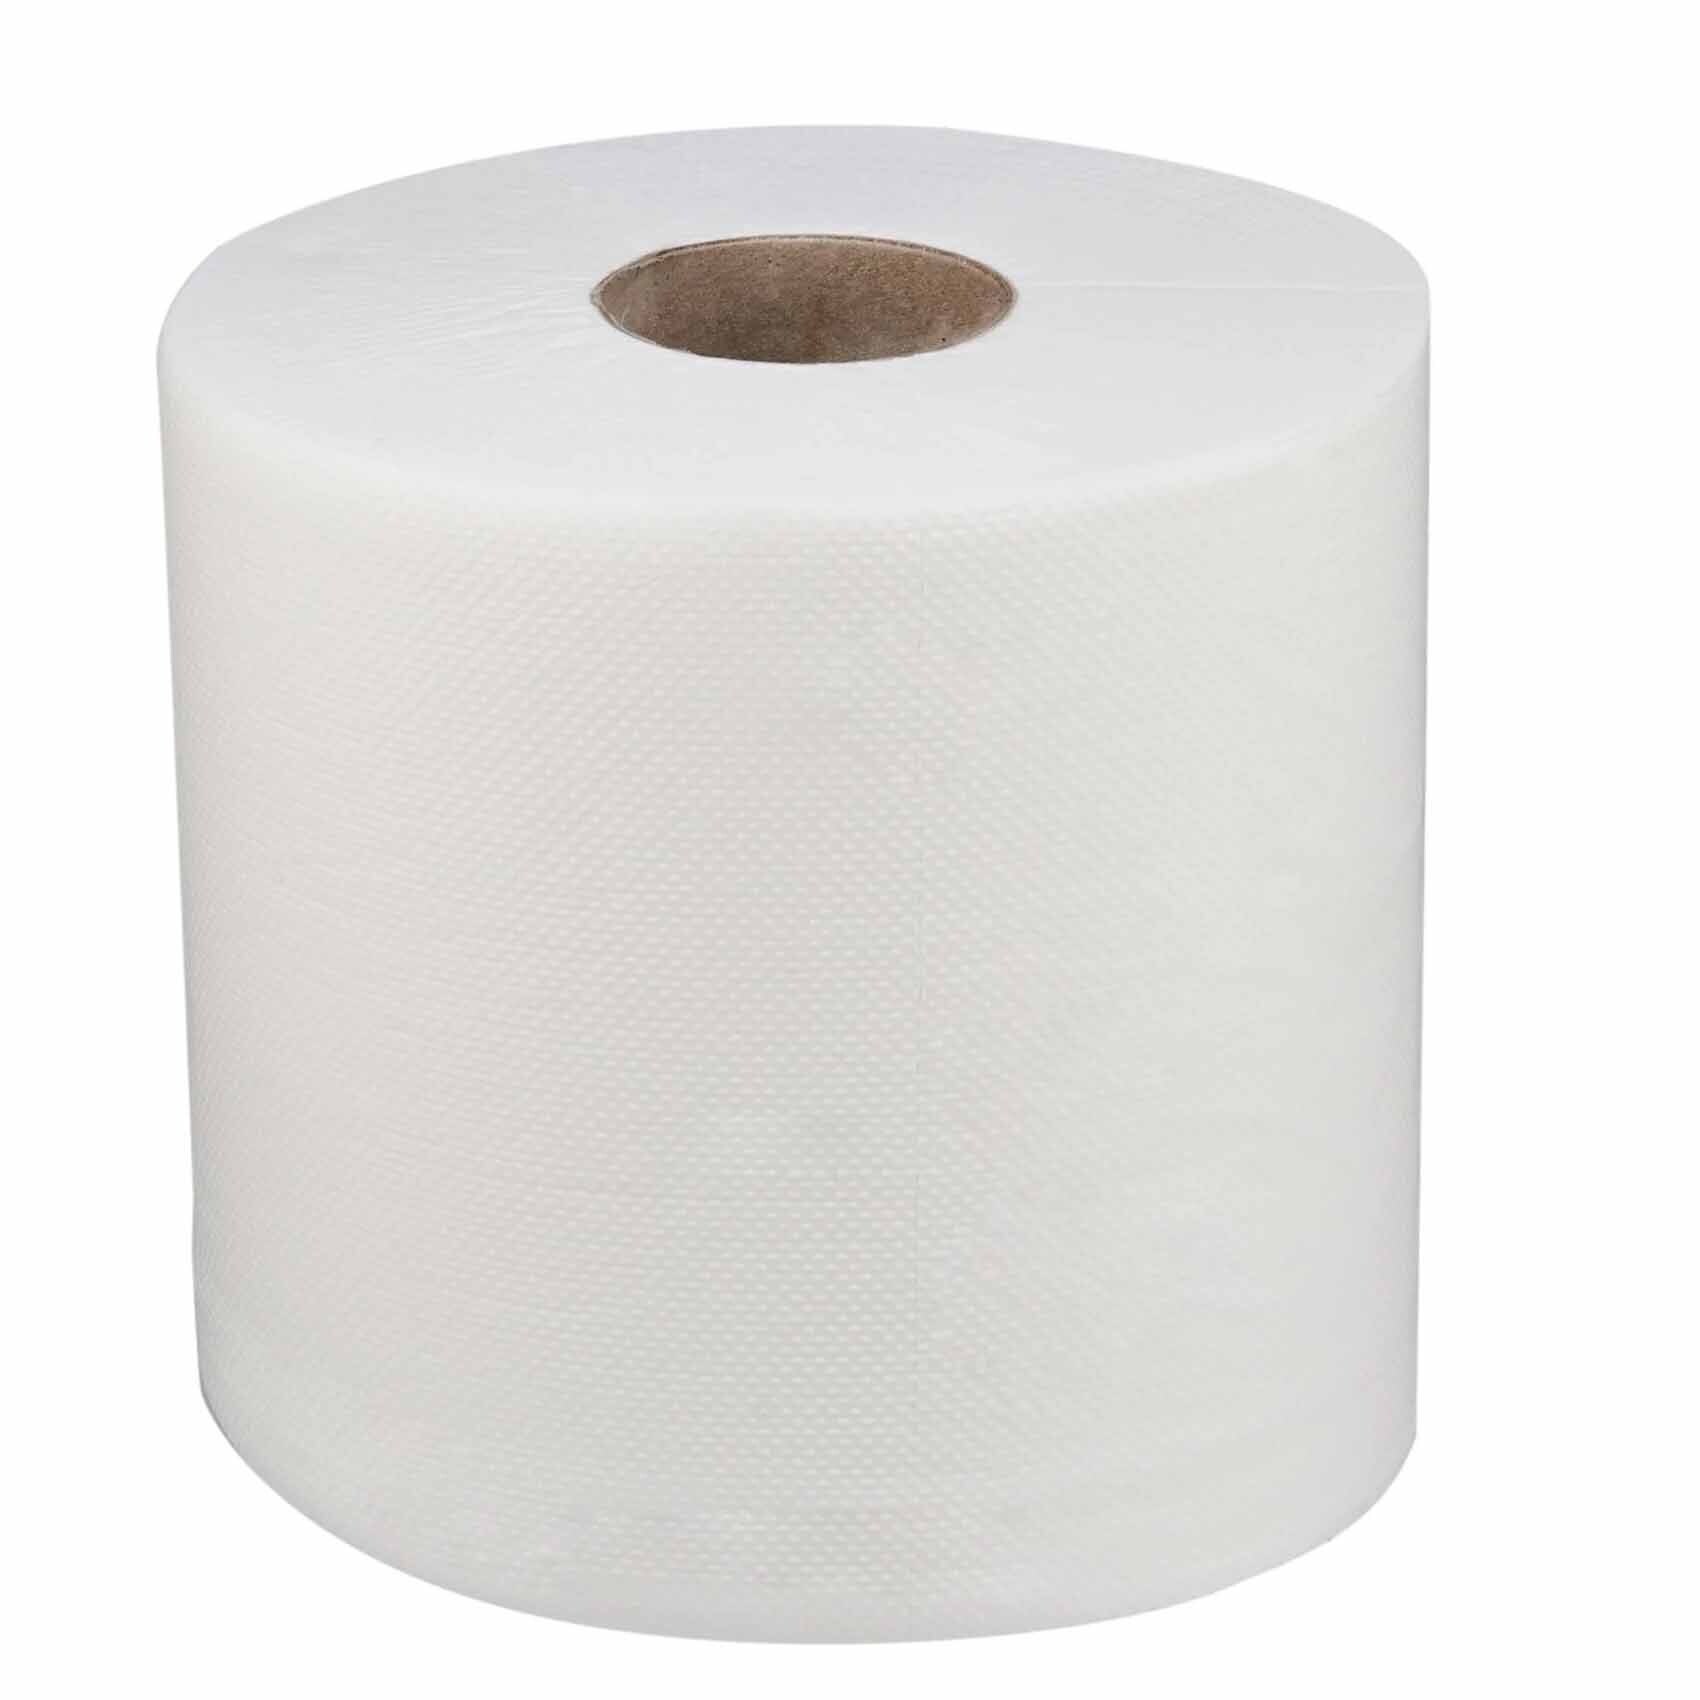 Uline Paper Roll Towels - 10 x 800', White